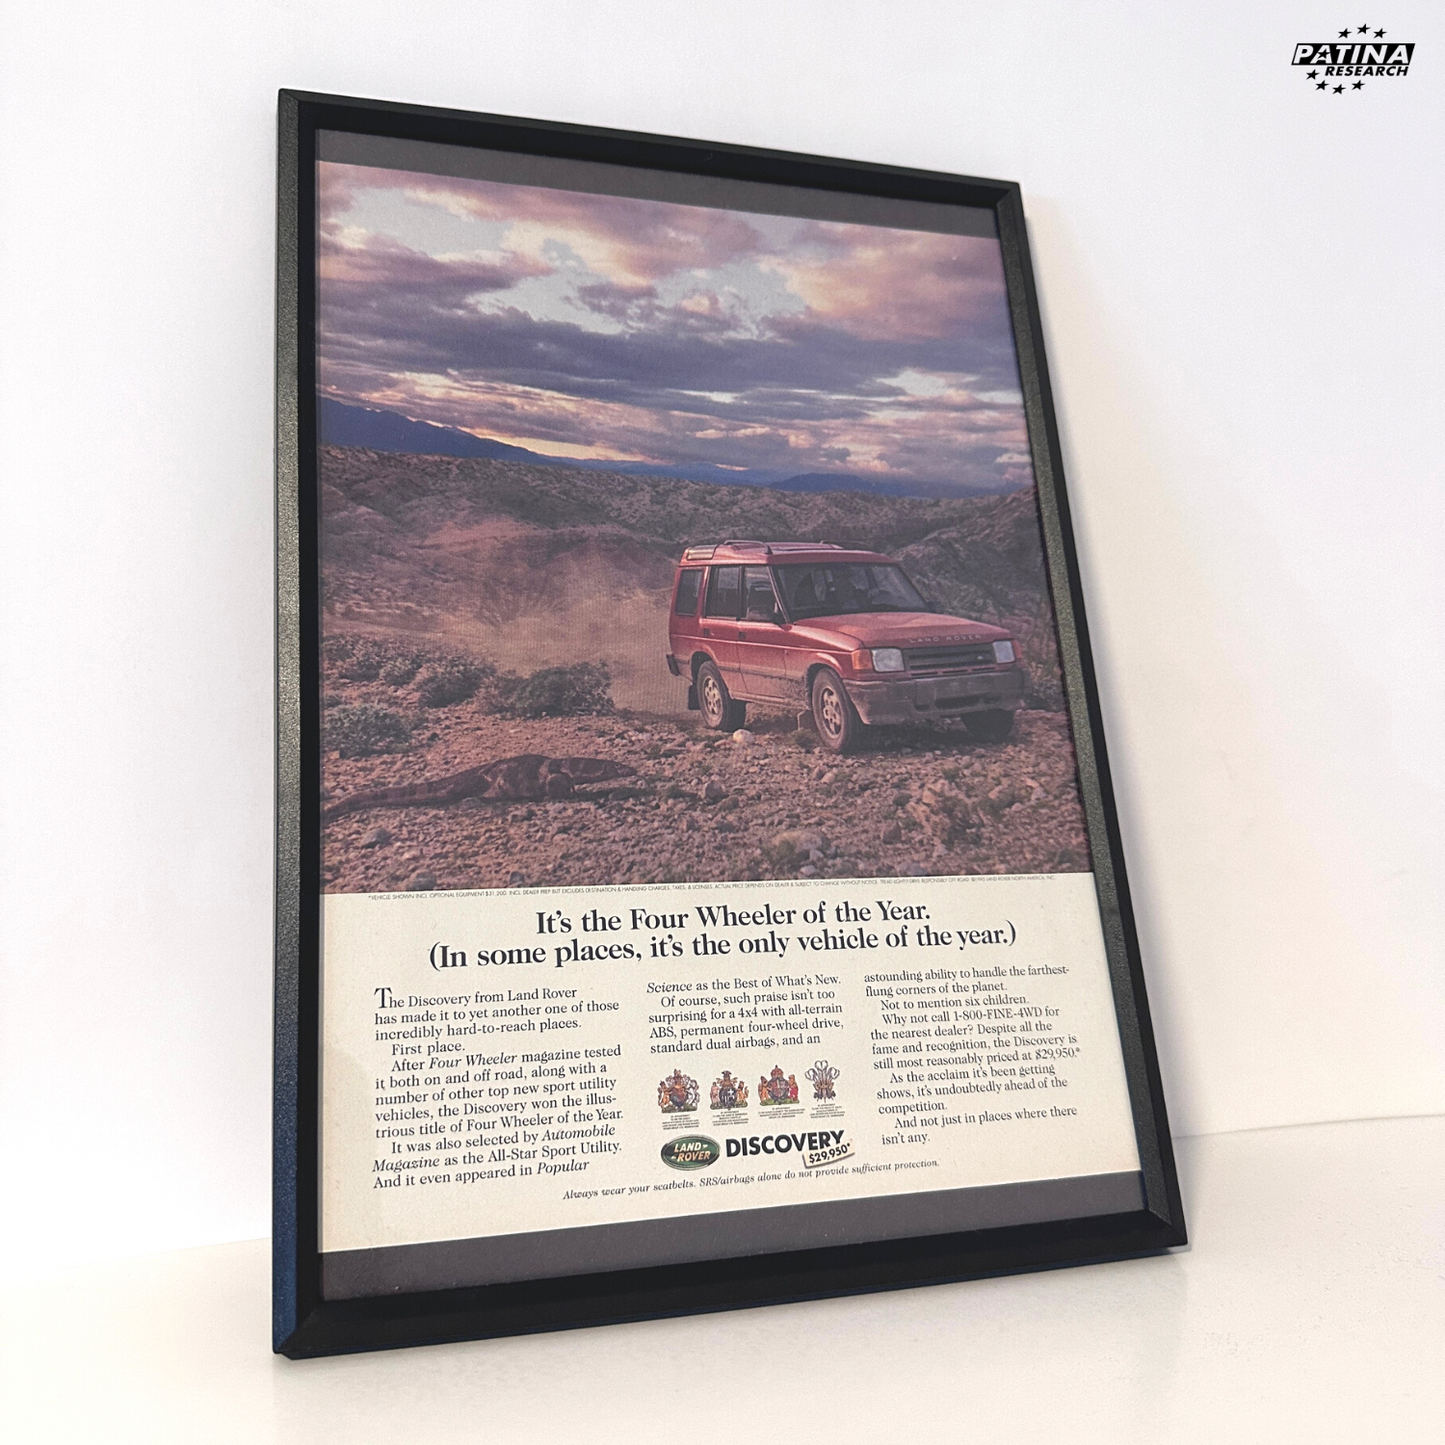 Land rover Discovery four wheeler of the year framed ad